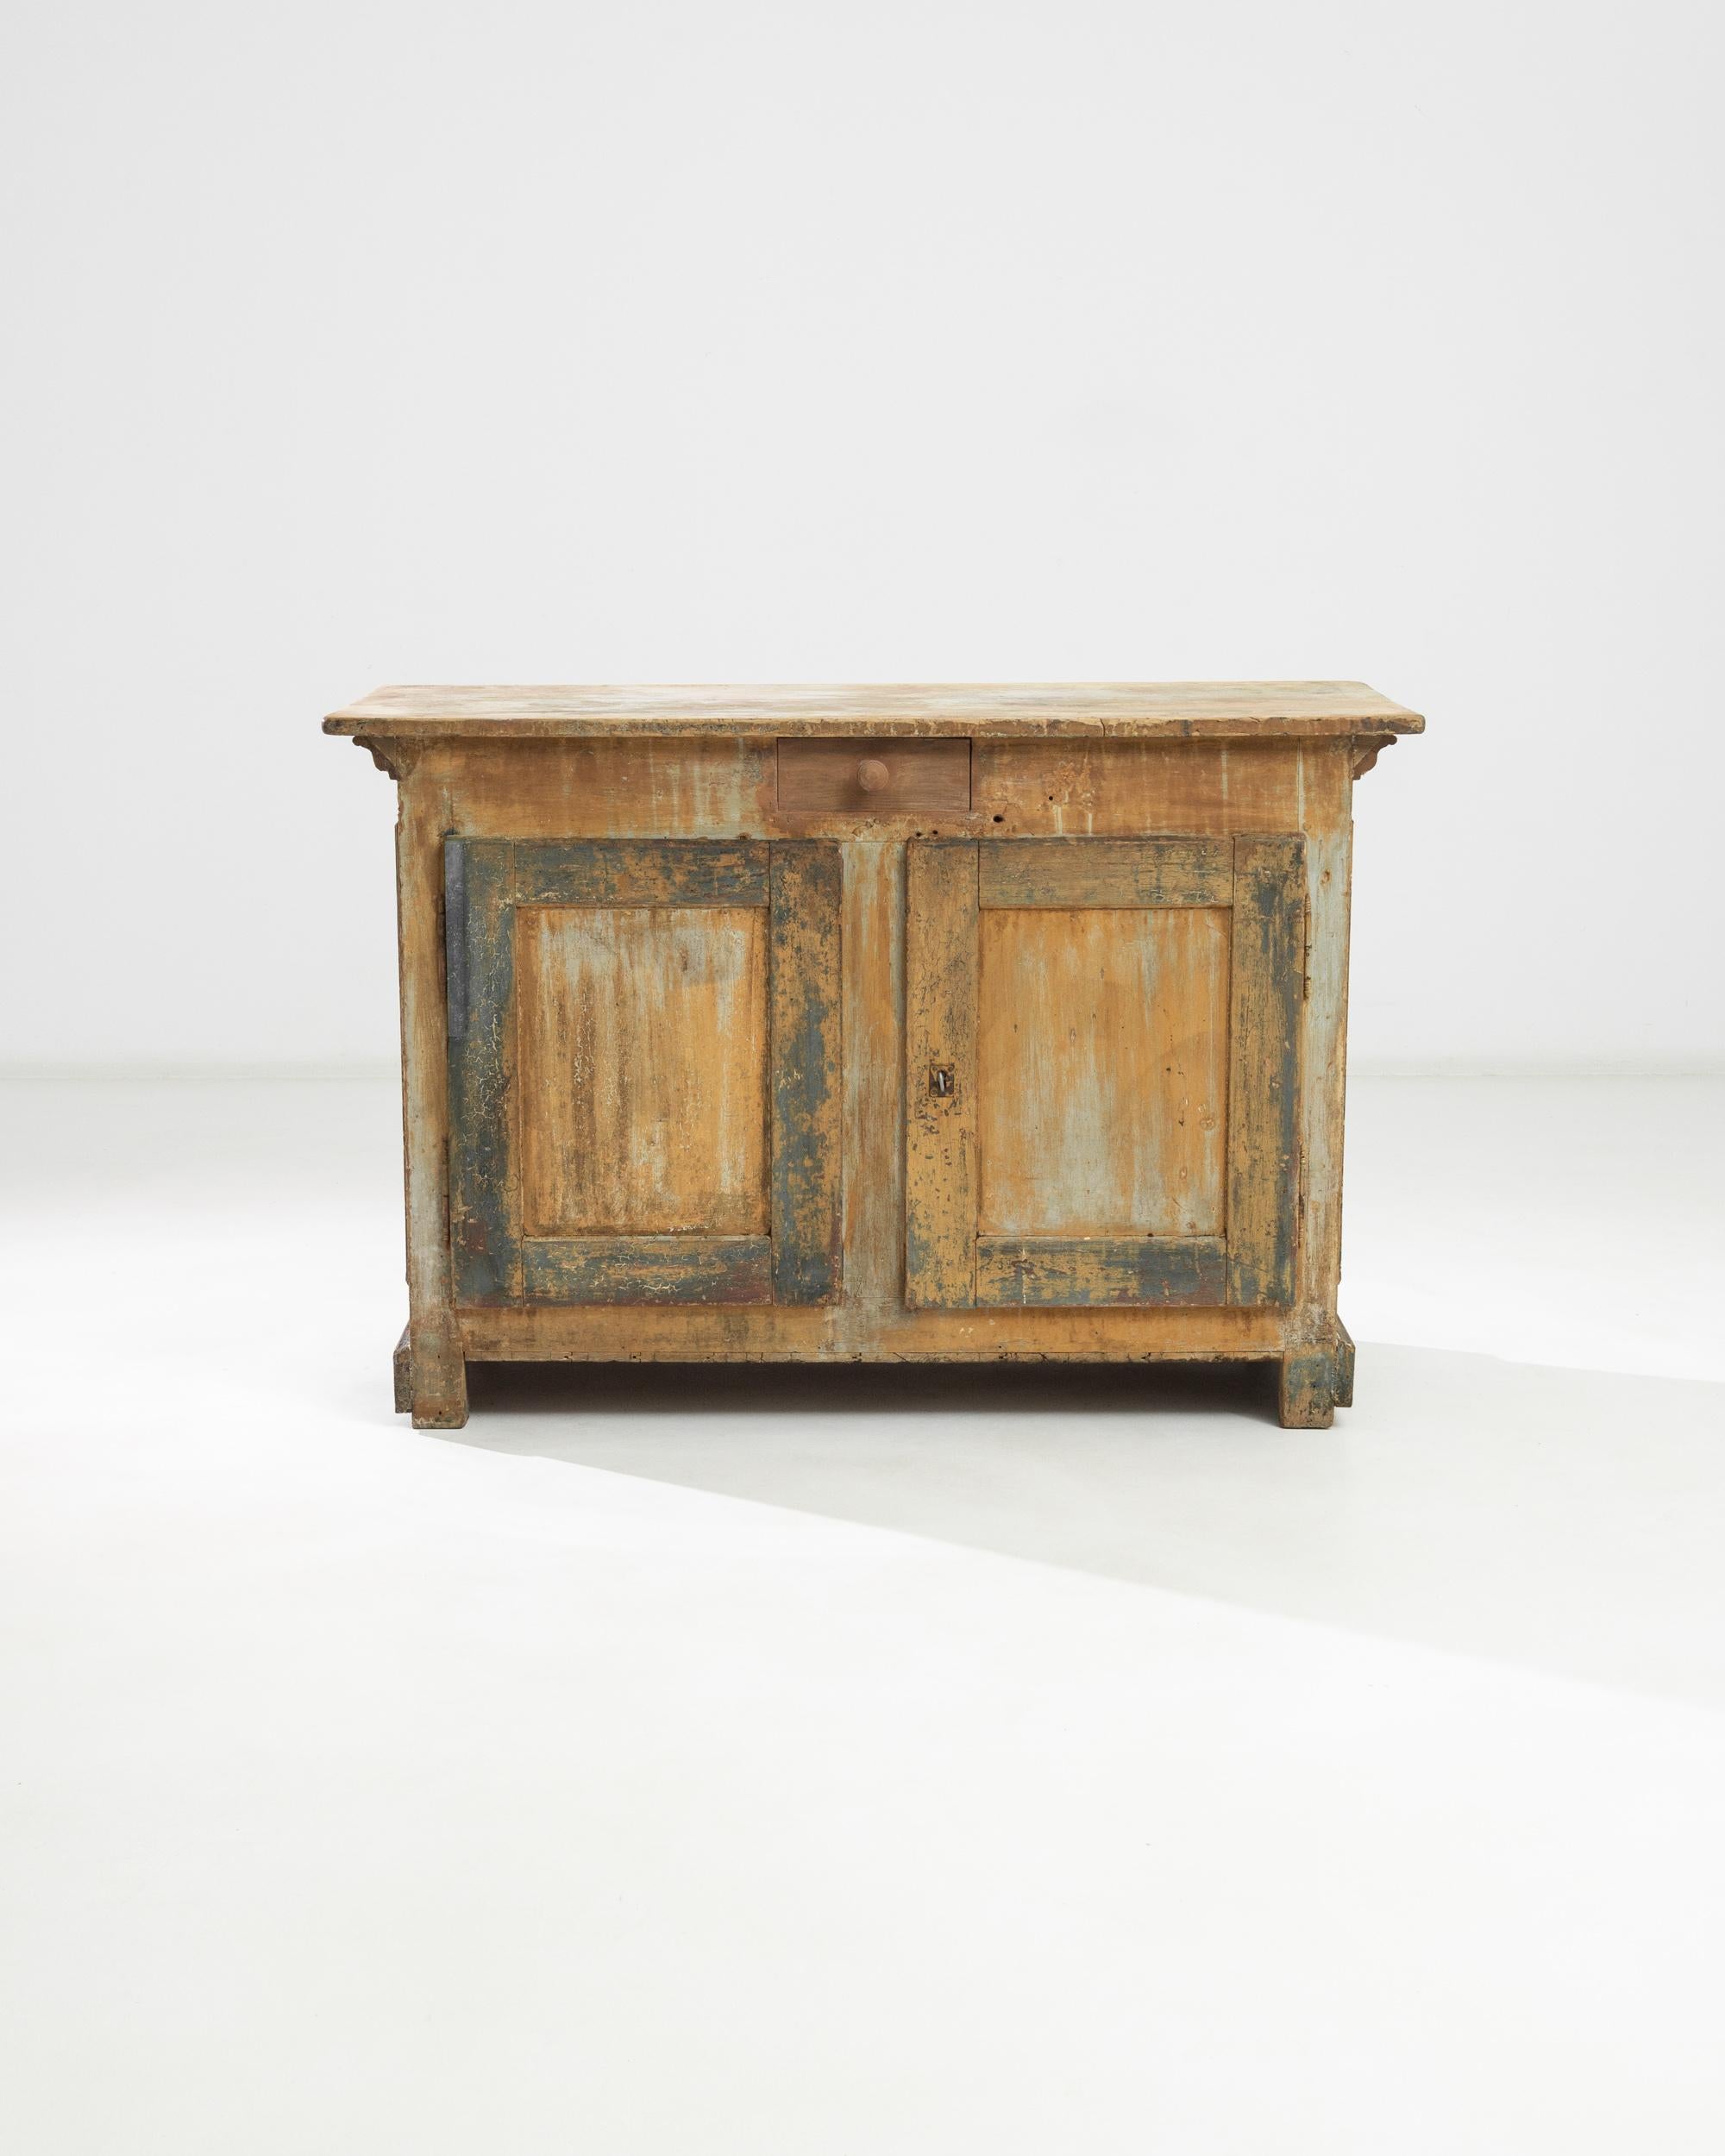 A wood patinated counter from France, produced during the 19th Century. A classic buffet in its original patina standing waist high, from the other side a bar; featuring a locking double cabinet and single, center drawer. The pair of raised, blue